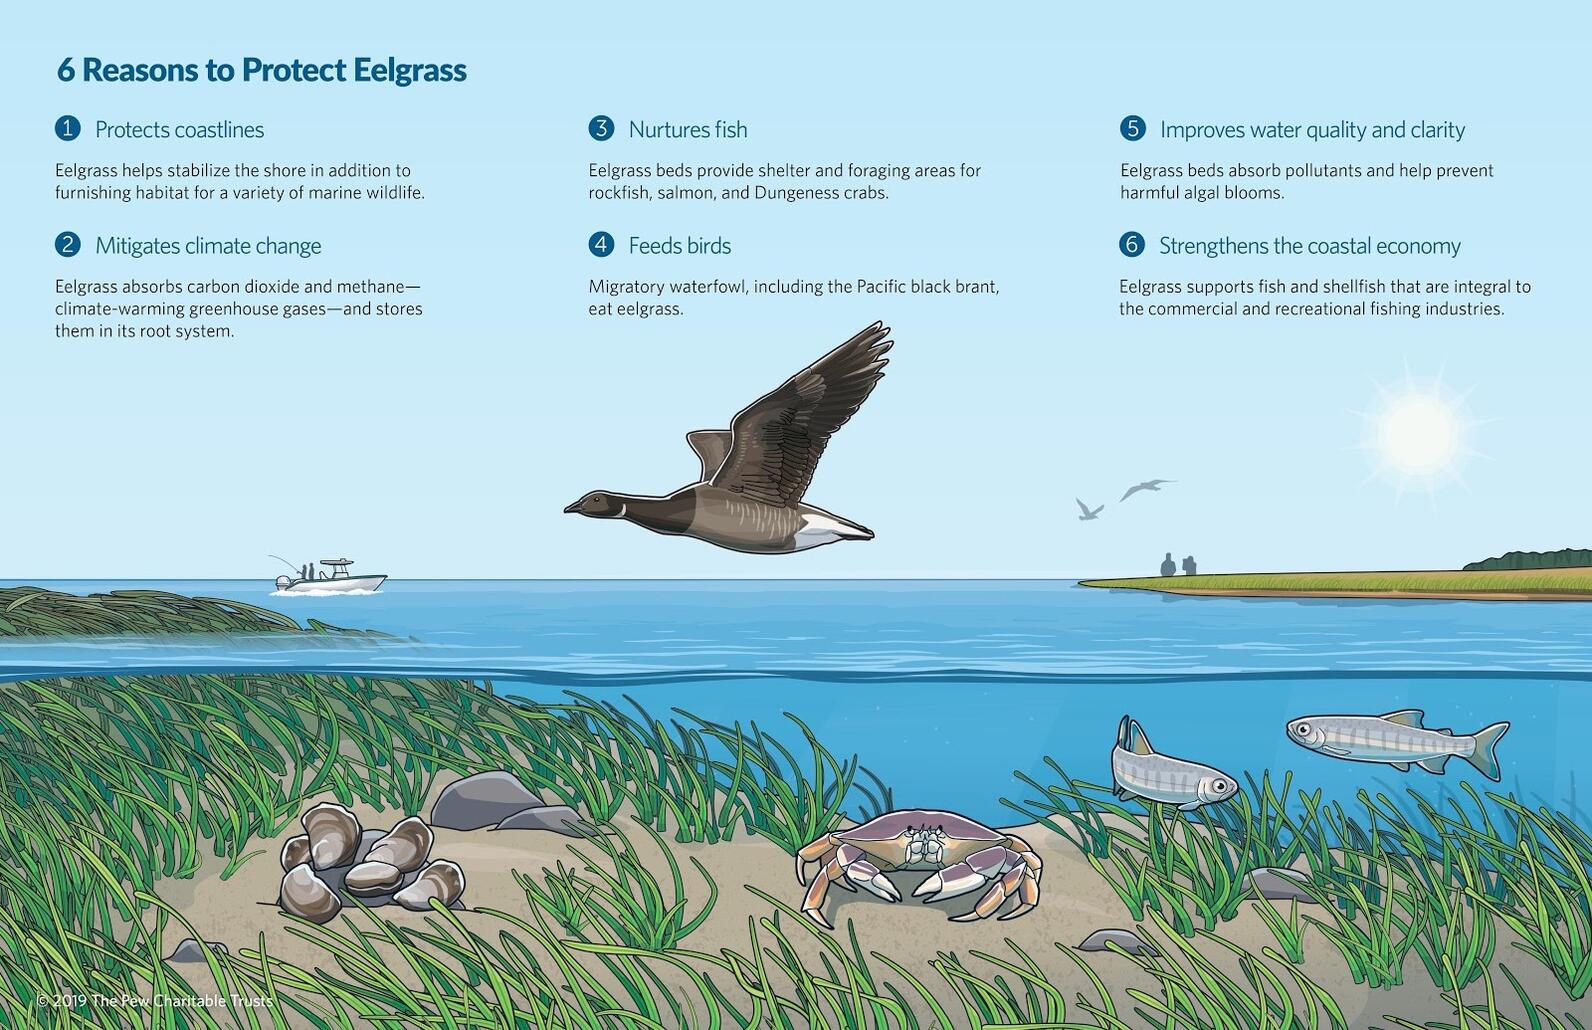  6 Reasons to Protect Eelgrass